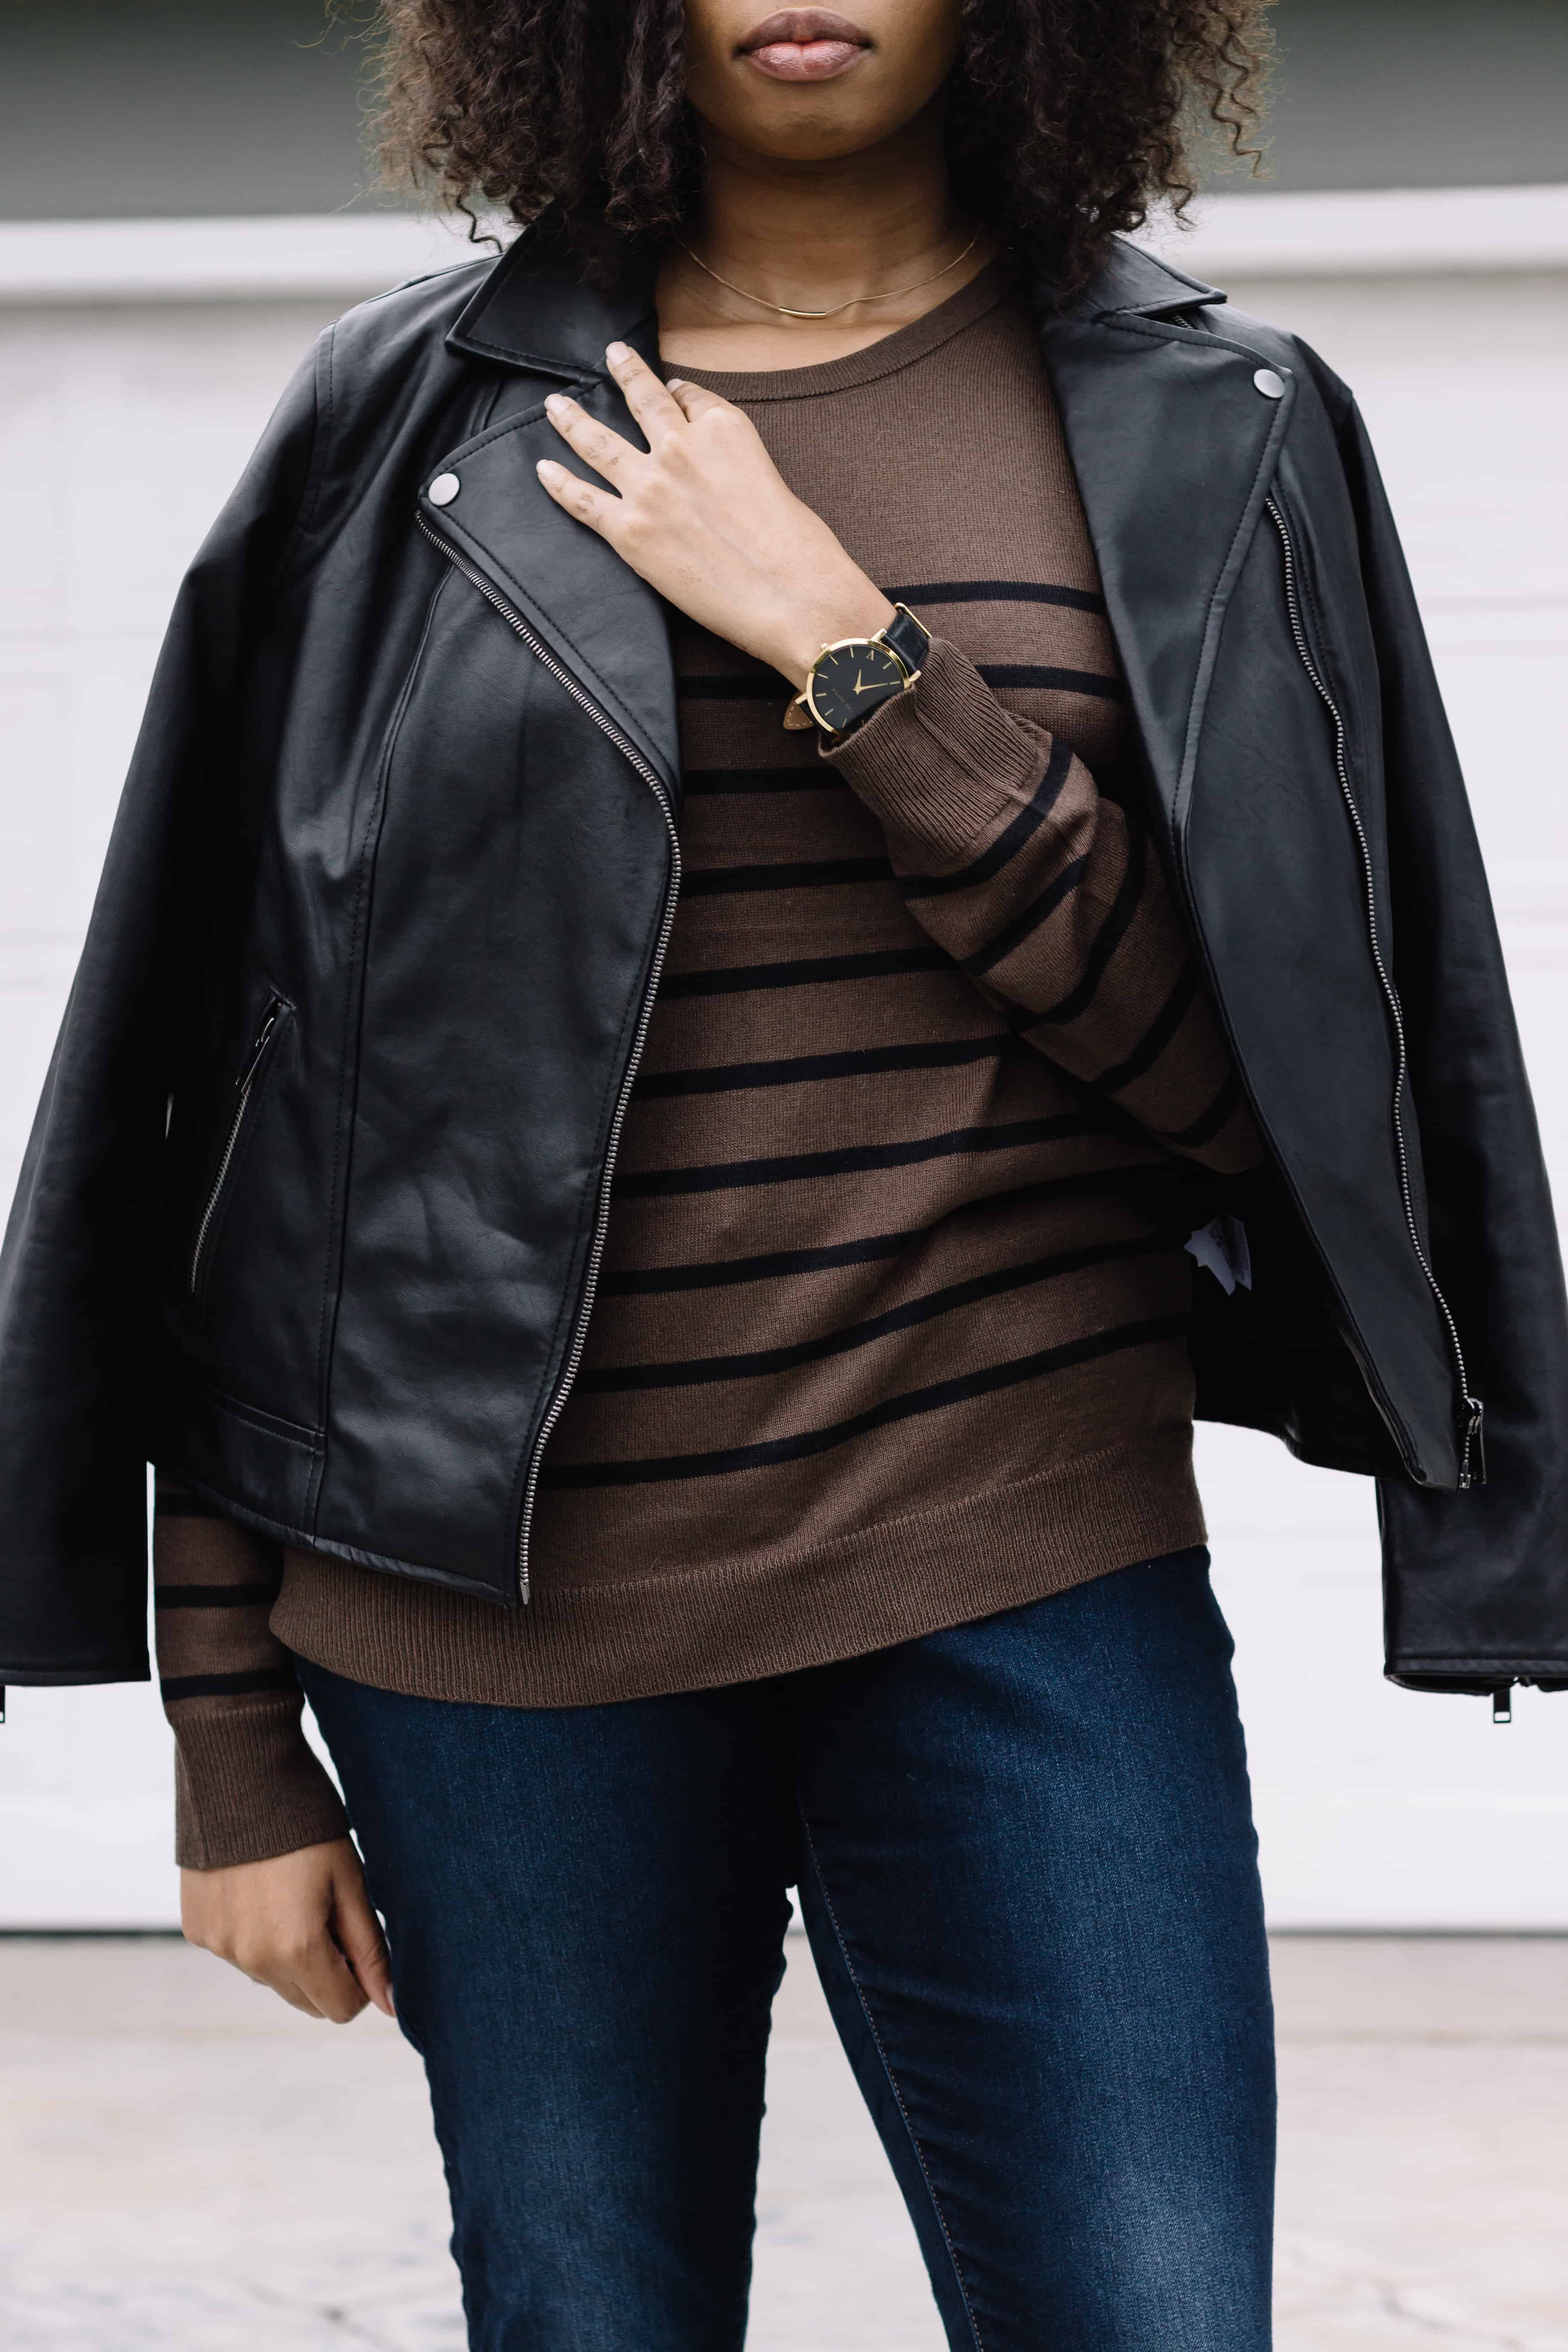 3 Casual Fall Favorites from Tobi. I'm sharing a few of my favorite fashion finds for fall. Click pin to see how I styled this Tobi striped sweater with a leather jacket and skinny jeans and shop my looks.